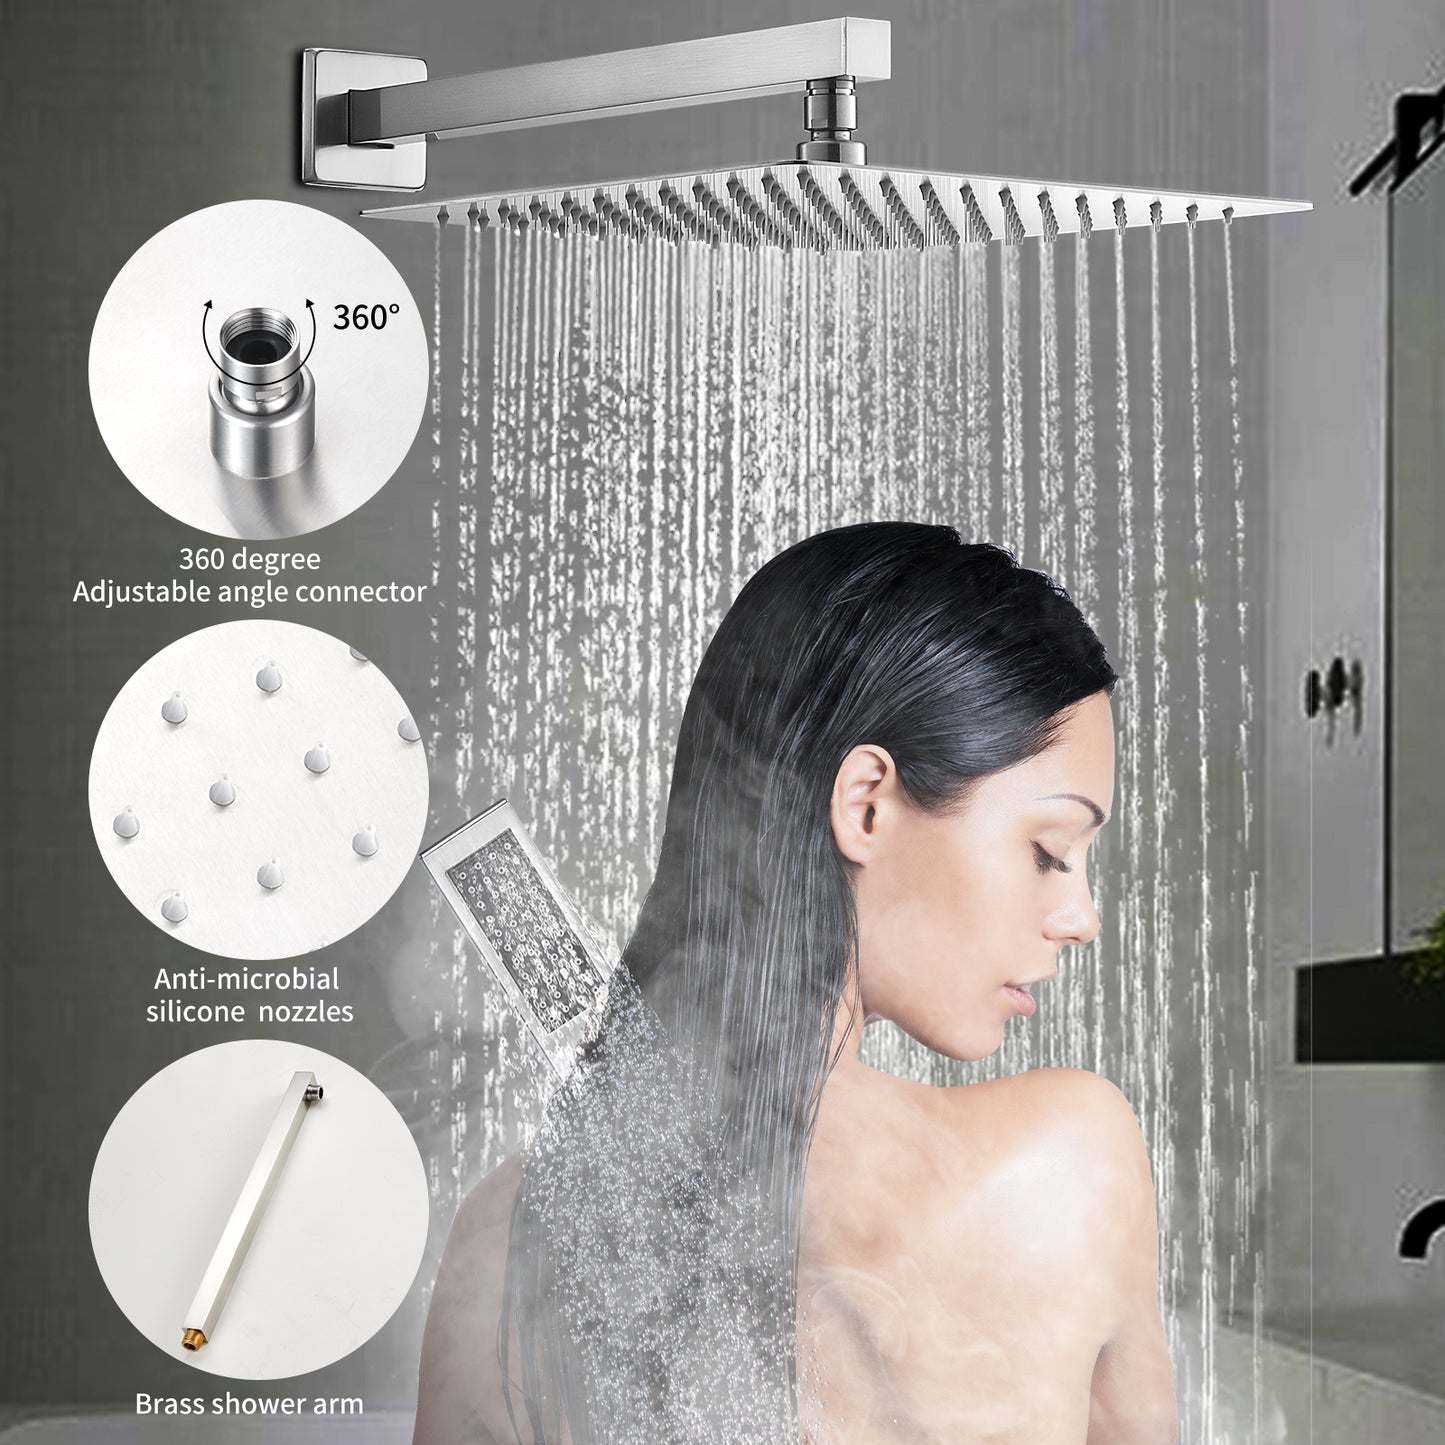 Cobbe Shower System, Shower Faucet Set Complete,12 inches Rainfall Shower Head with Handheld,Shower Faucet Set for Bathroom Rough-in Valve Body and Trim Included